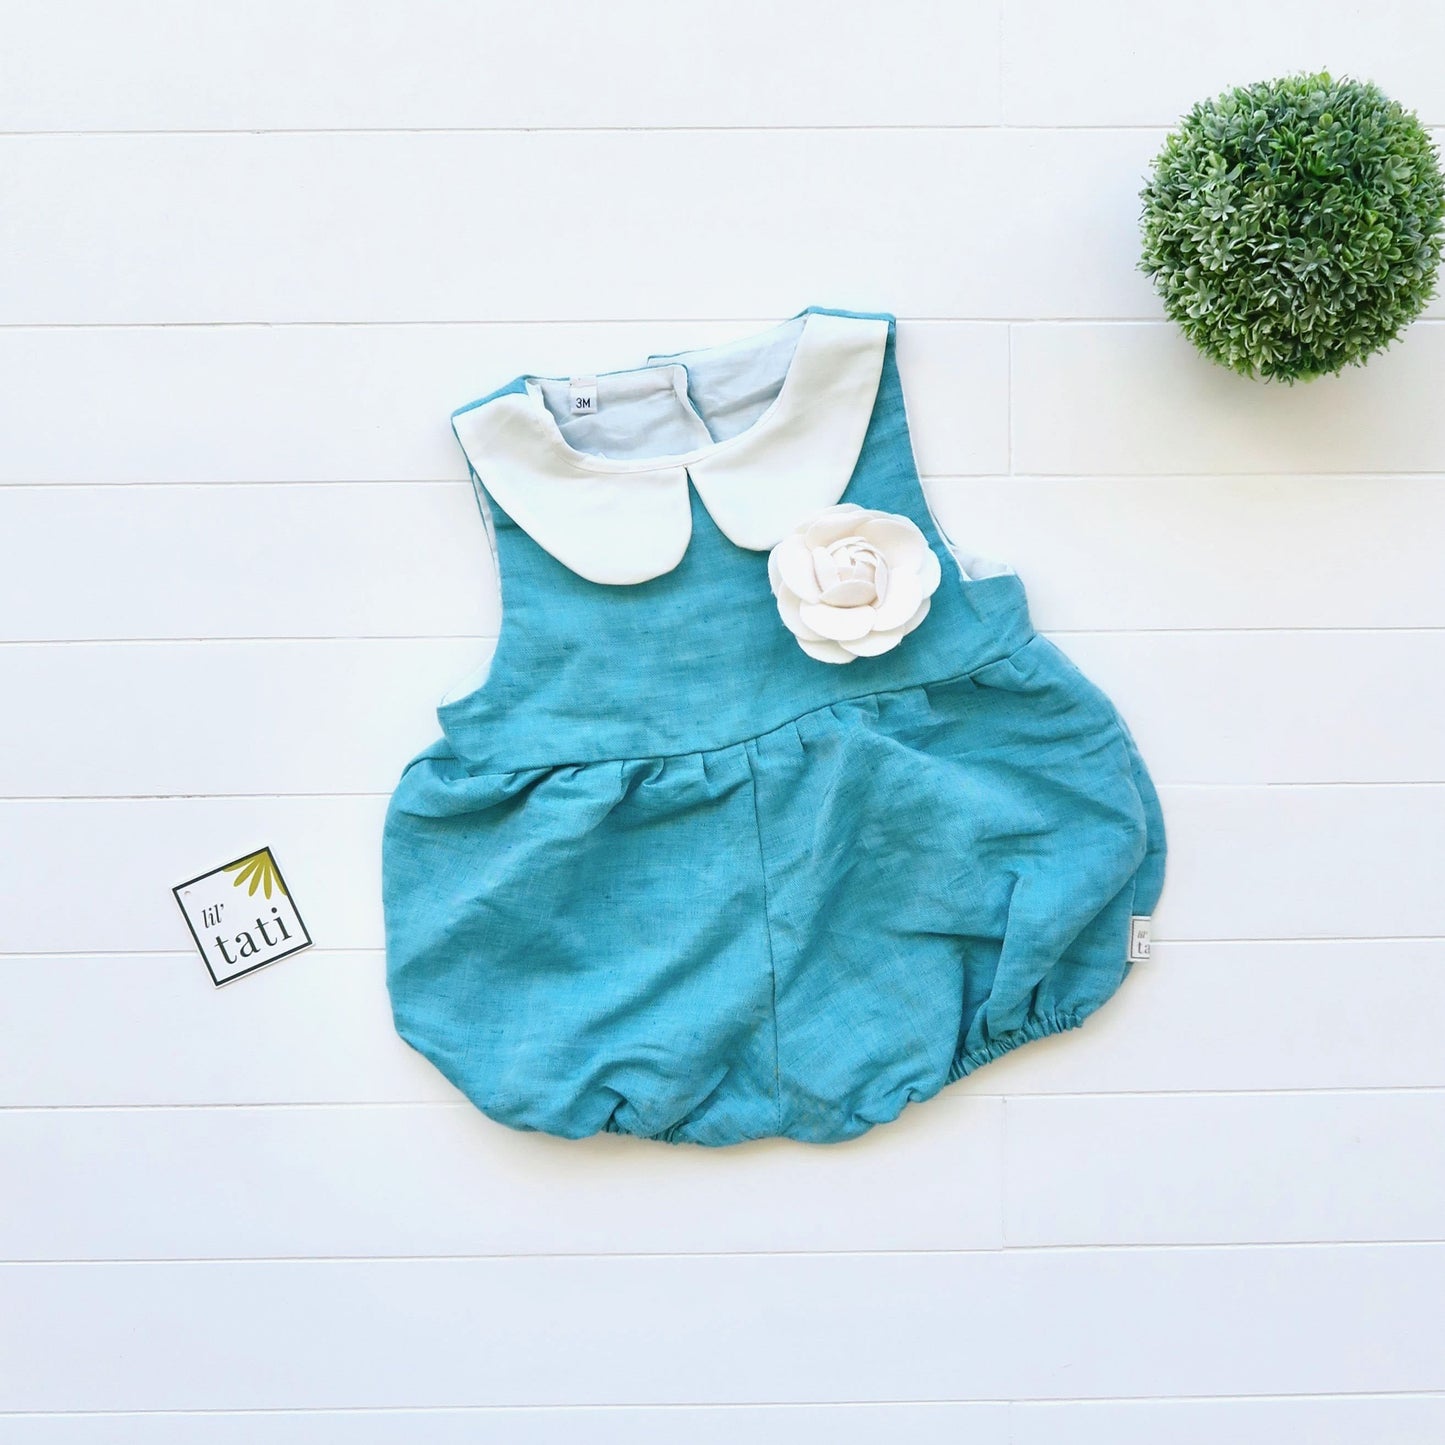 Orchid Playsuit - Collar in Teal Linen - Lil' Tati